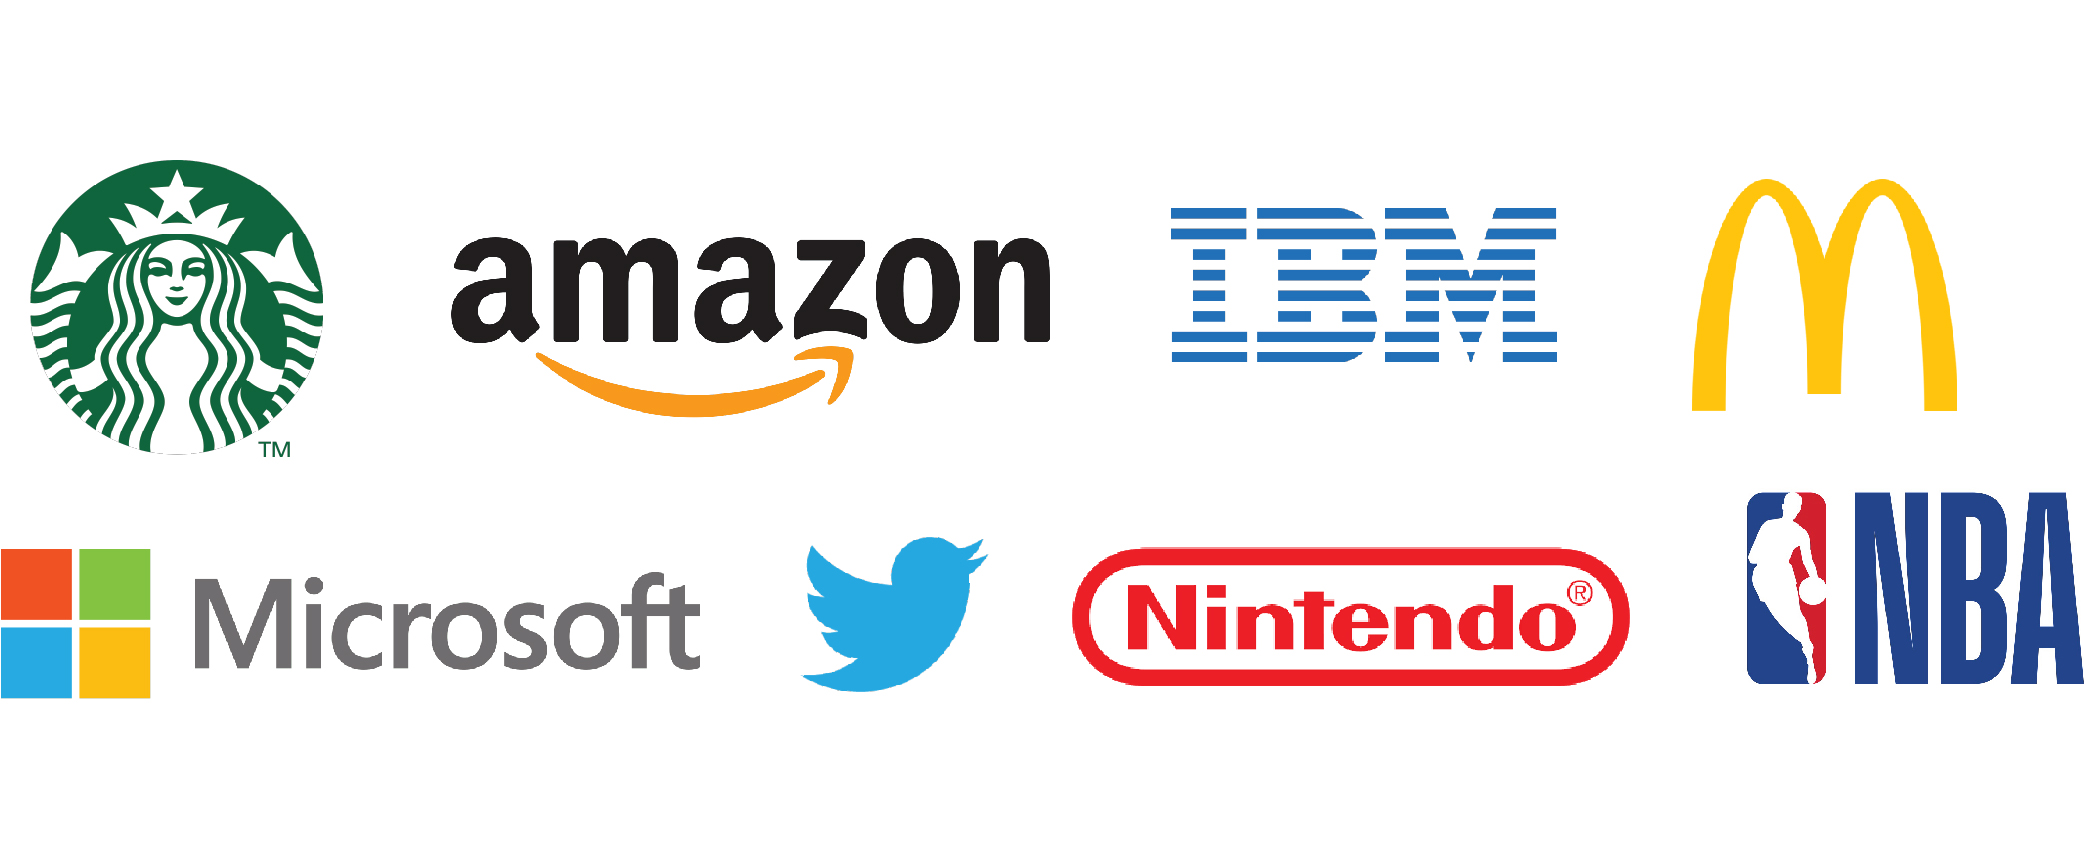 Examples of notable companies with static, or fixed, brand identities, including Starbucks, Amazon, IBM, Macdonald's, Microsoft, Twitter, Nintendo and NBA